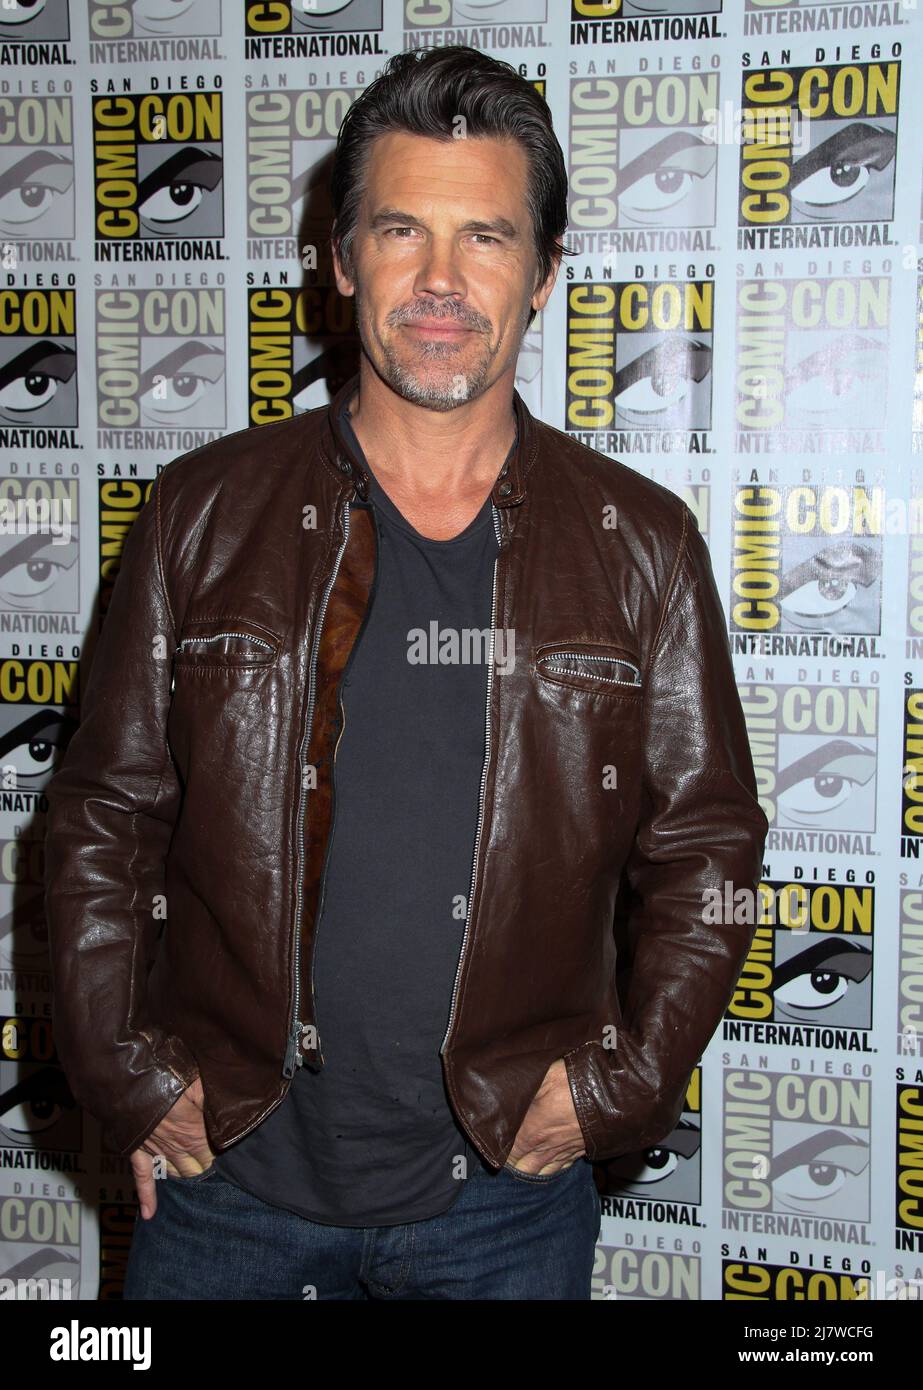 SAN DIEGO - JUL 26:  Josh Brolin at the 'Sin City: A Dame To Kill For' Comic Con Red Carpet at the Hilton San Diego Bayfront on July 26, 2014 in San Diego, CA Stock Photo